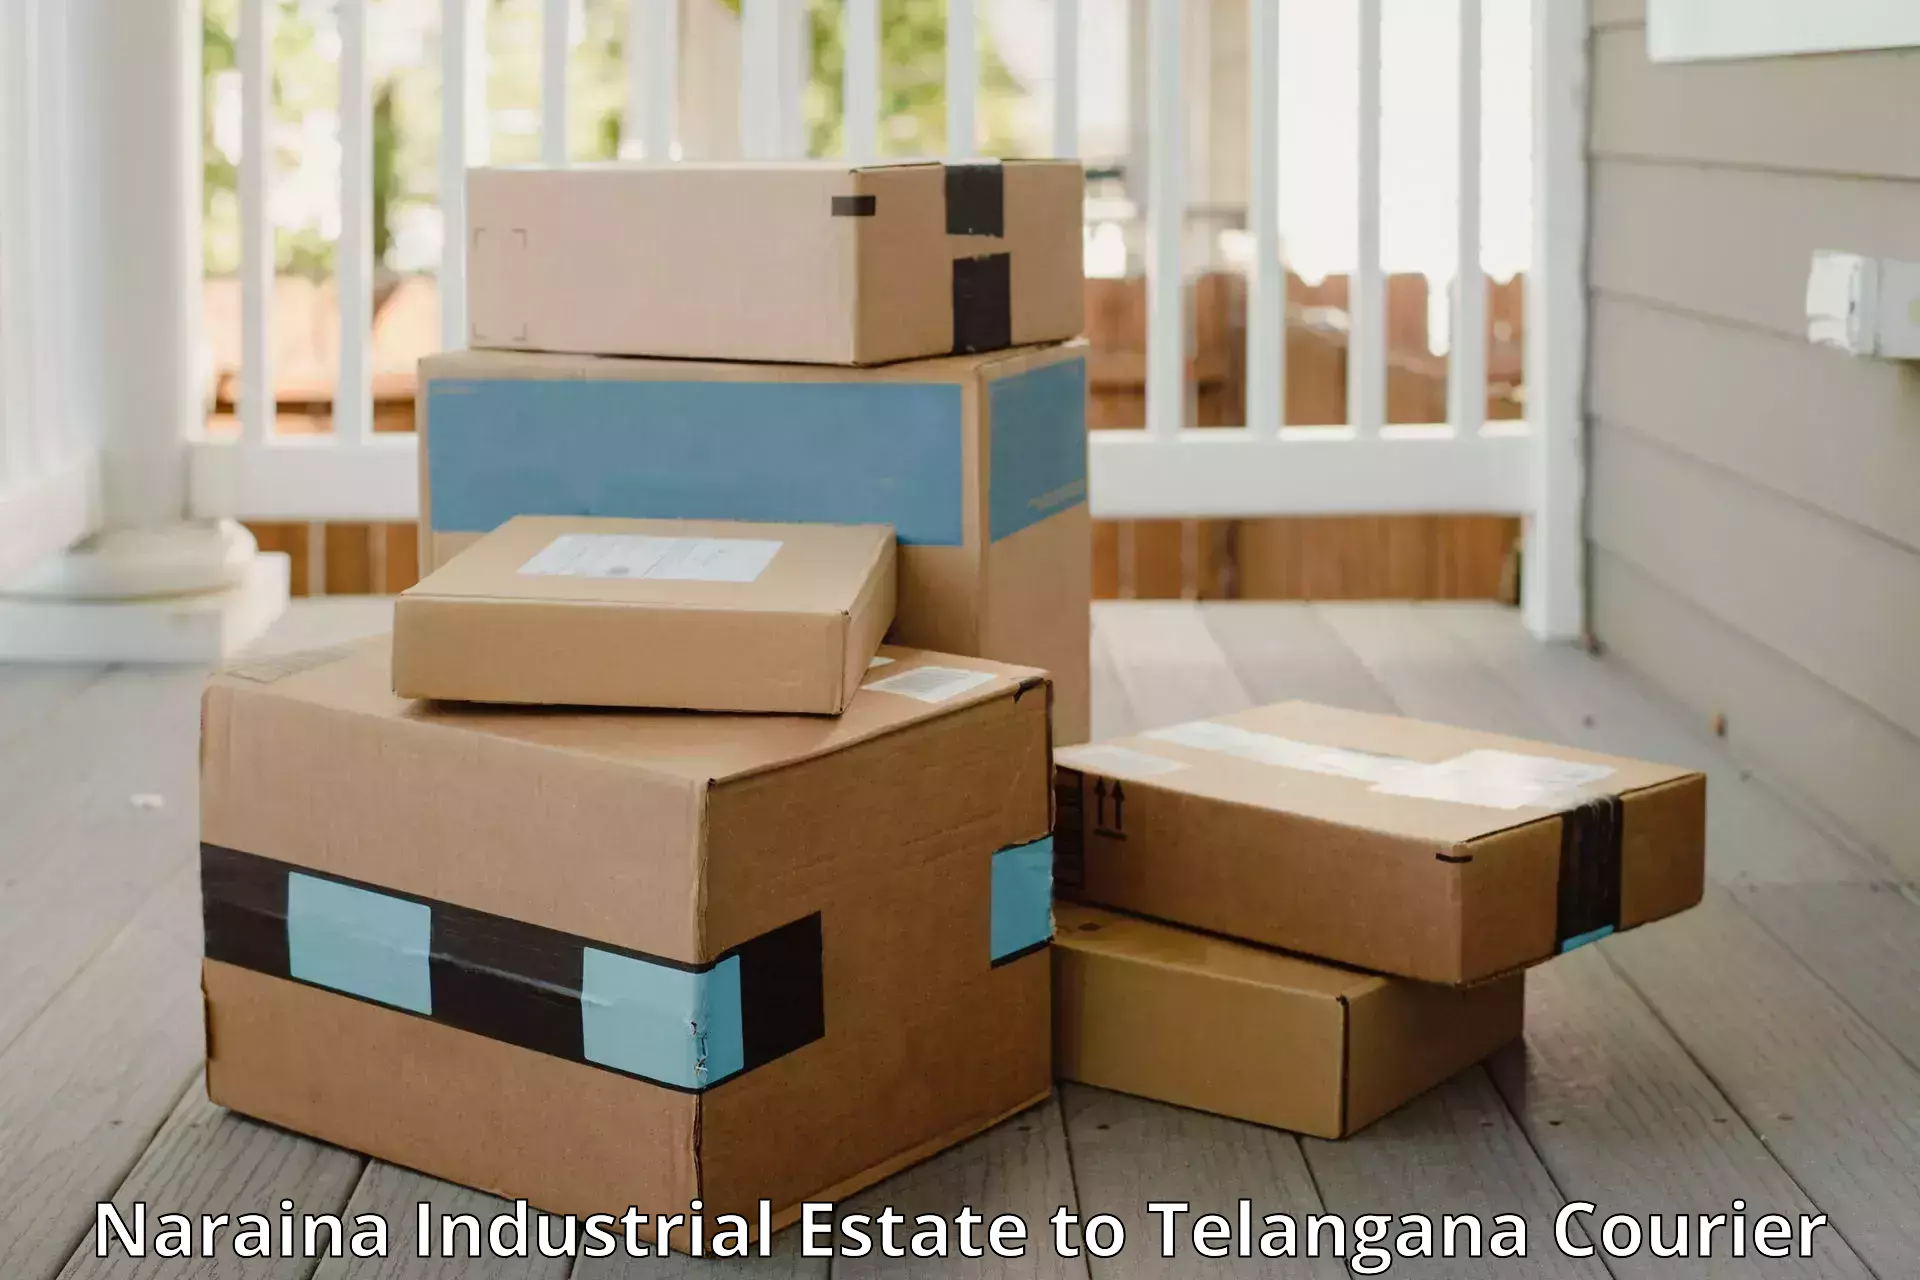 Nationwide luggage courier Naraina Industrial Estate to Bellampalli